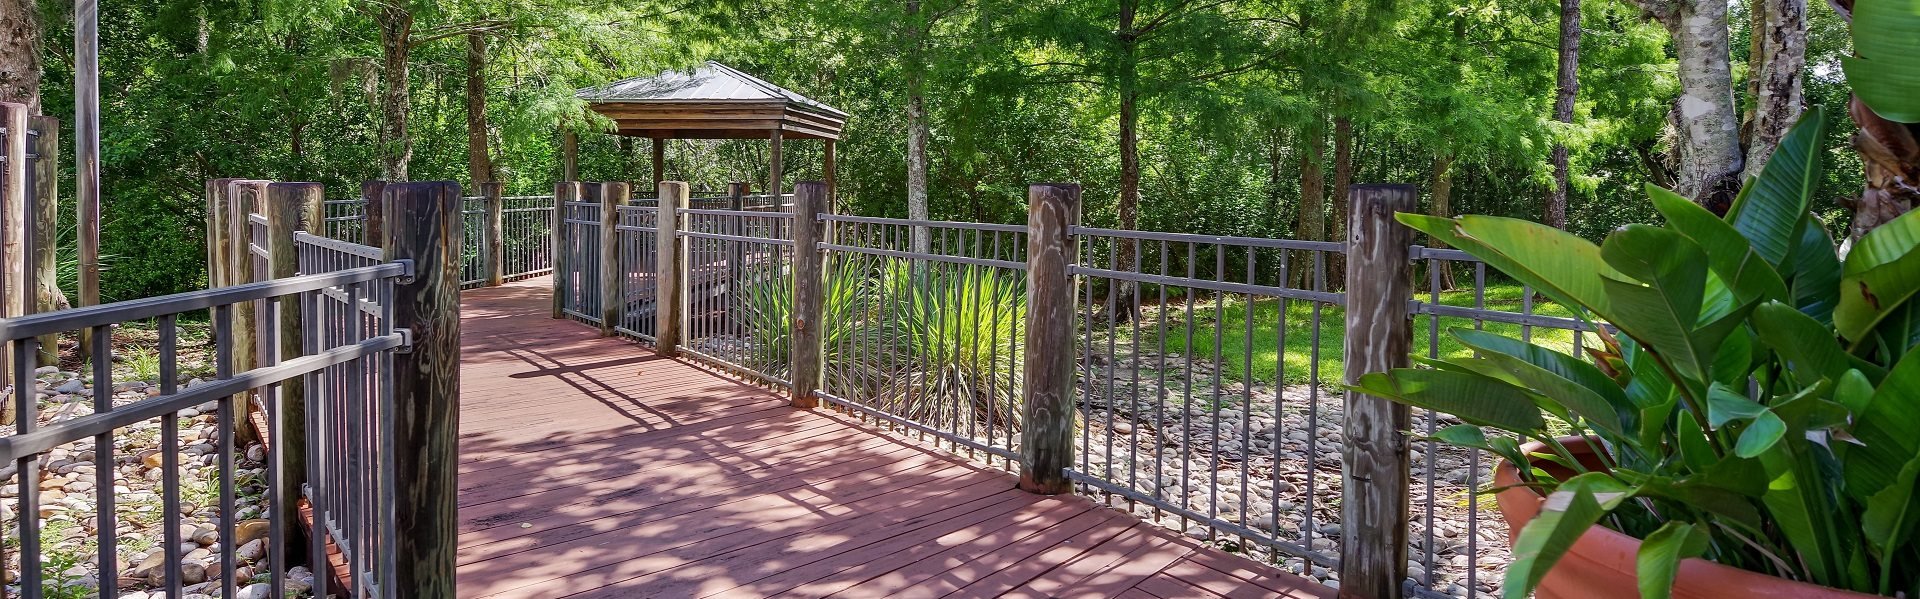 Deck Style Walkway with Railing Going through Trees